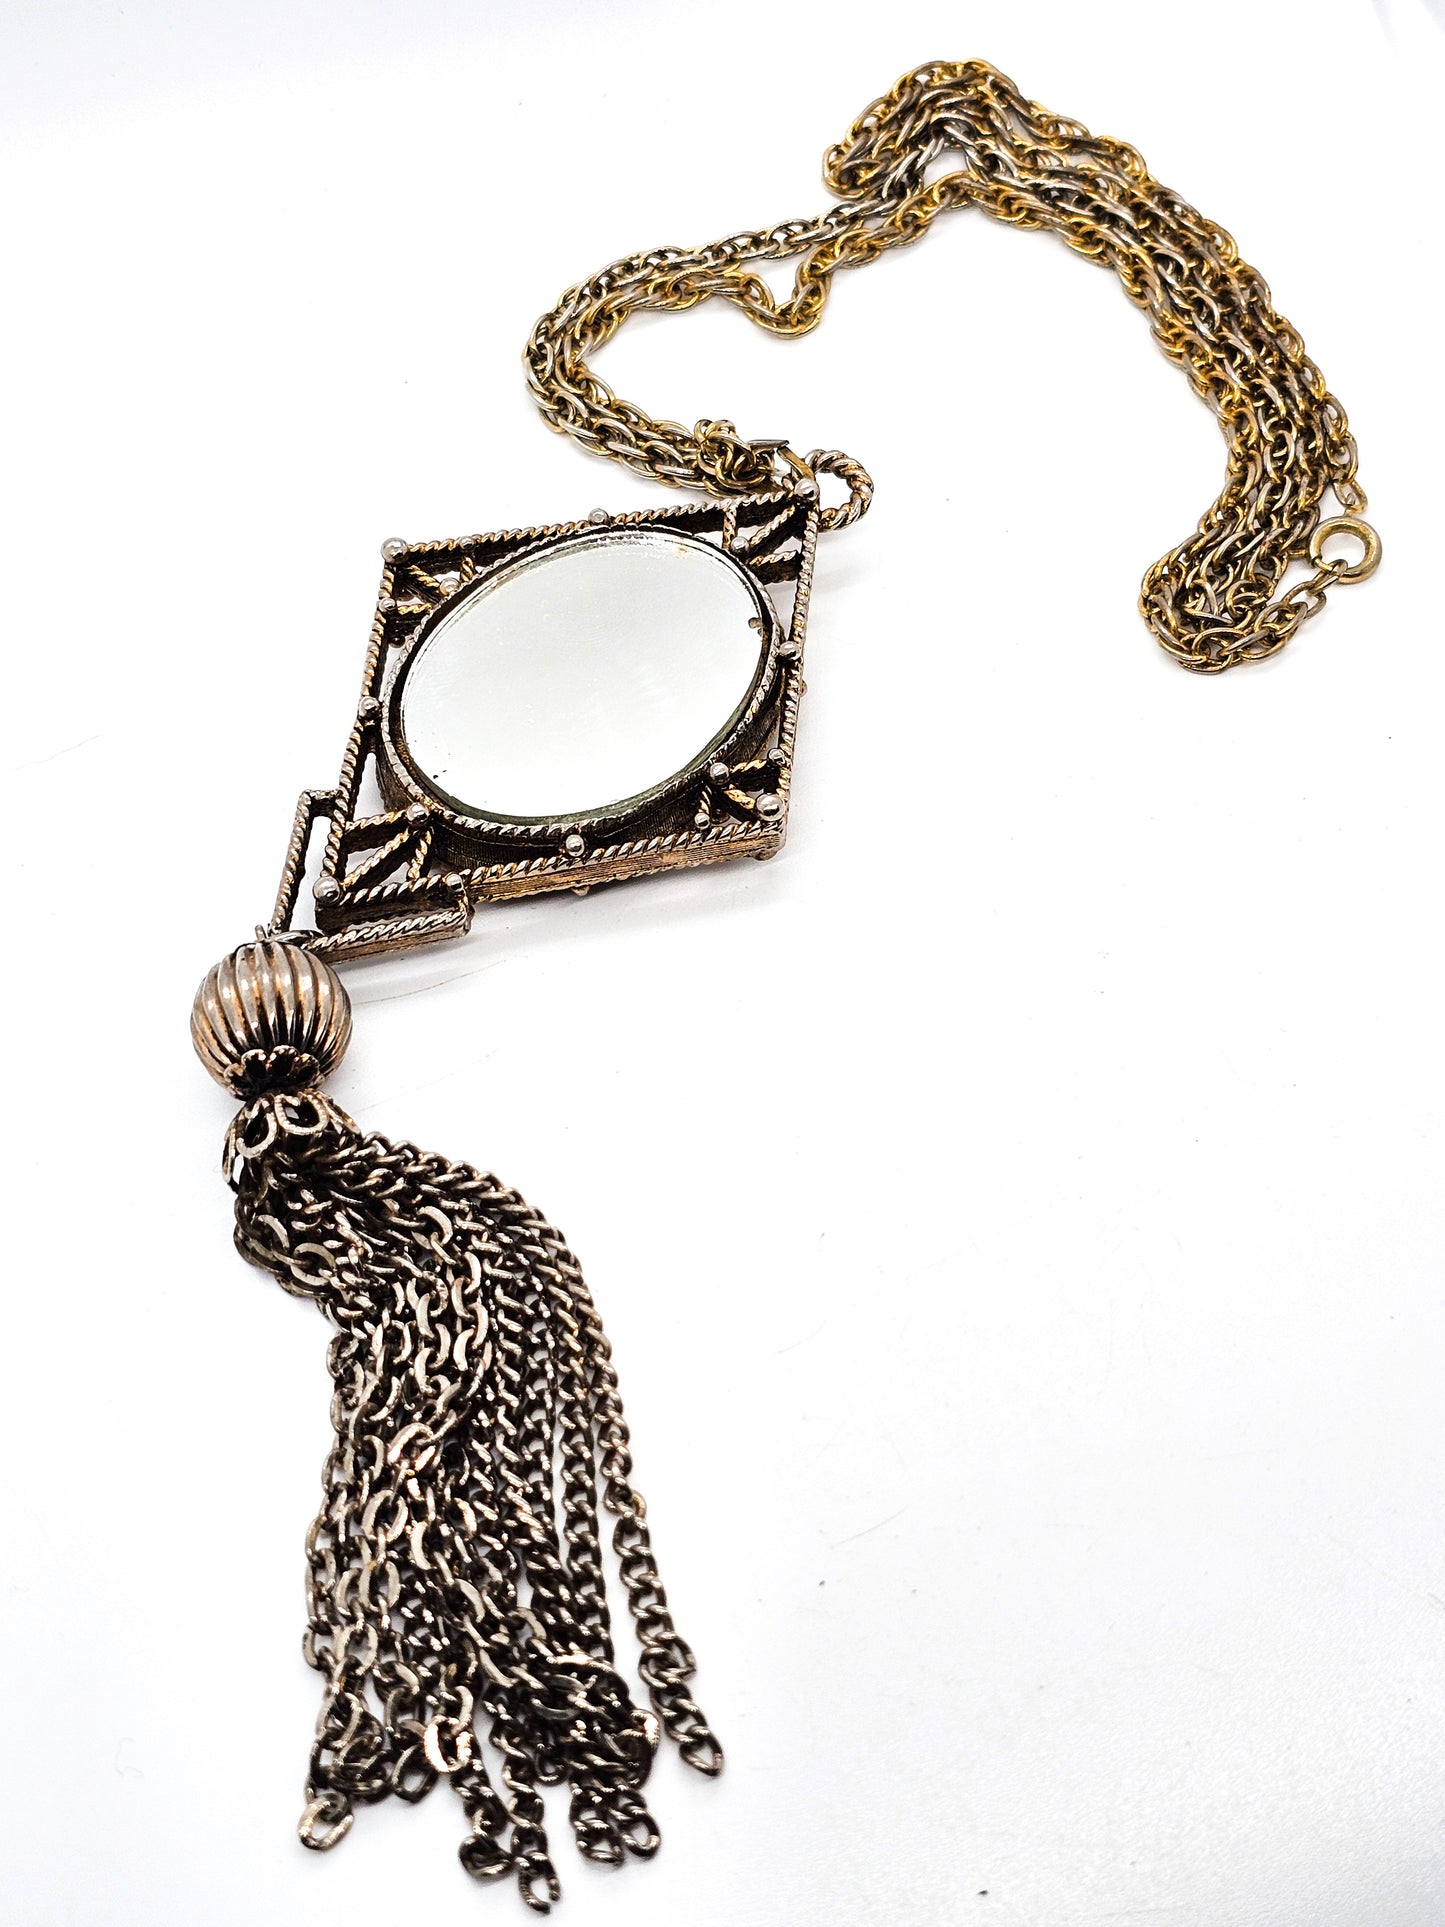 Courting Couple cameo tassel vintage pendant necklace with mirror on long chain